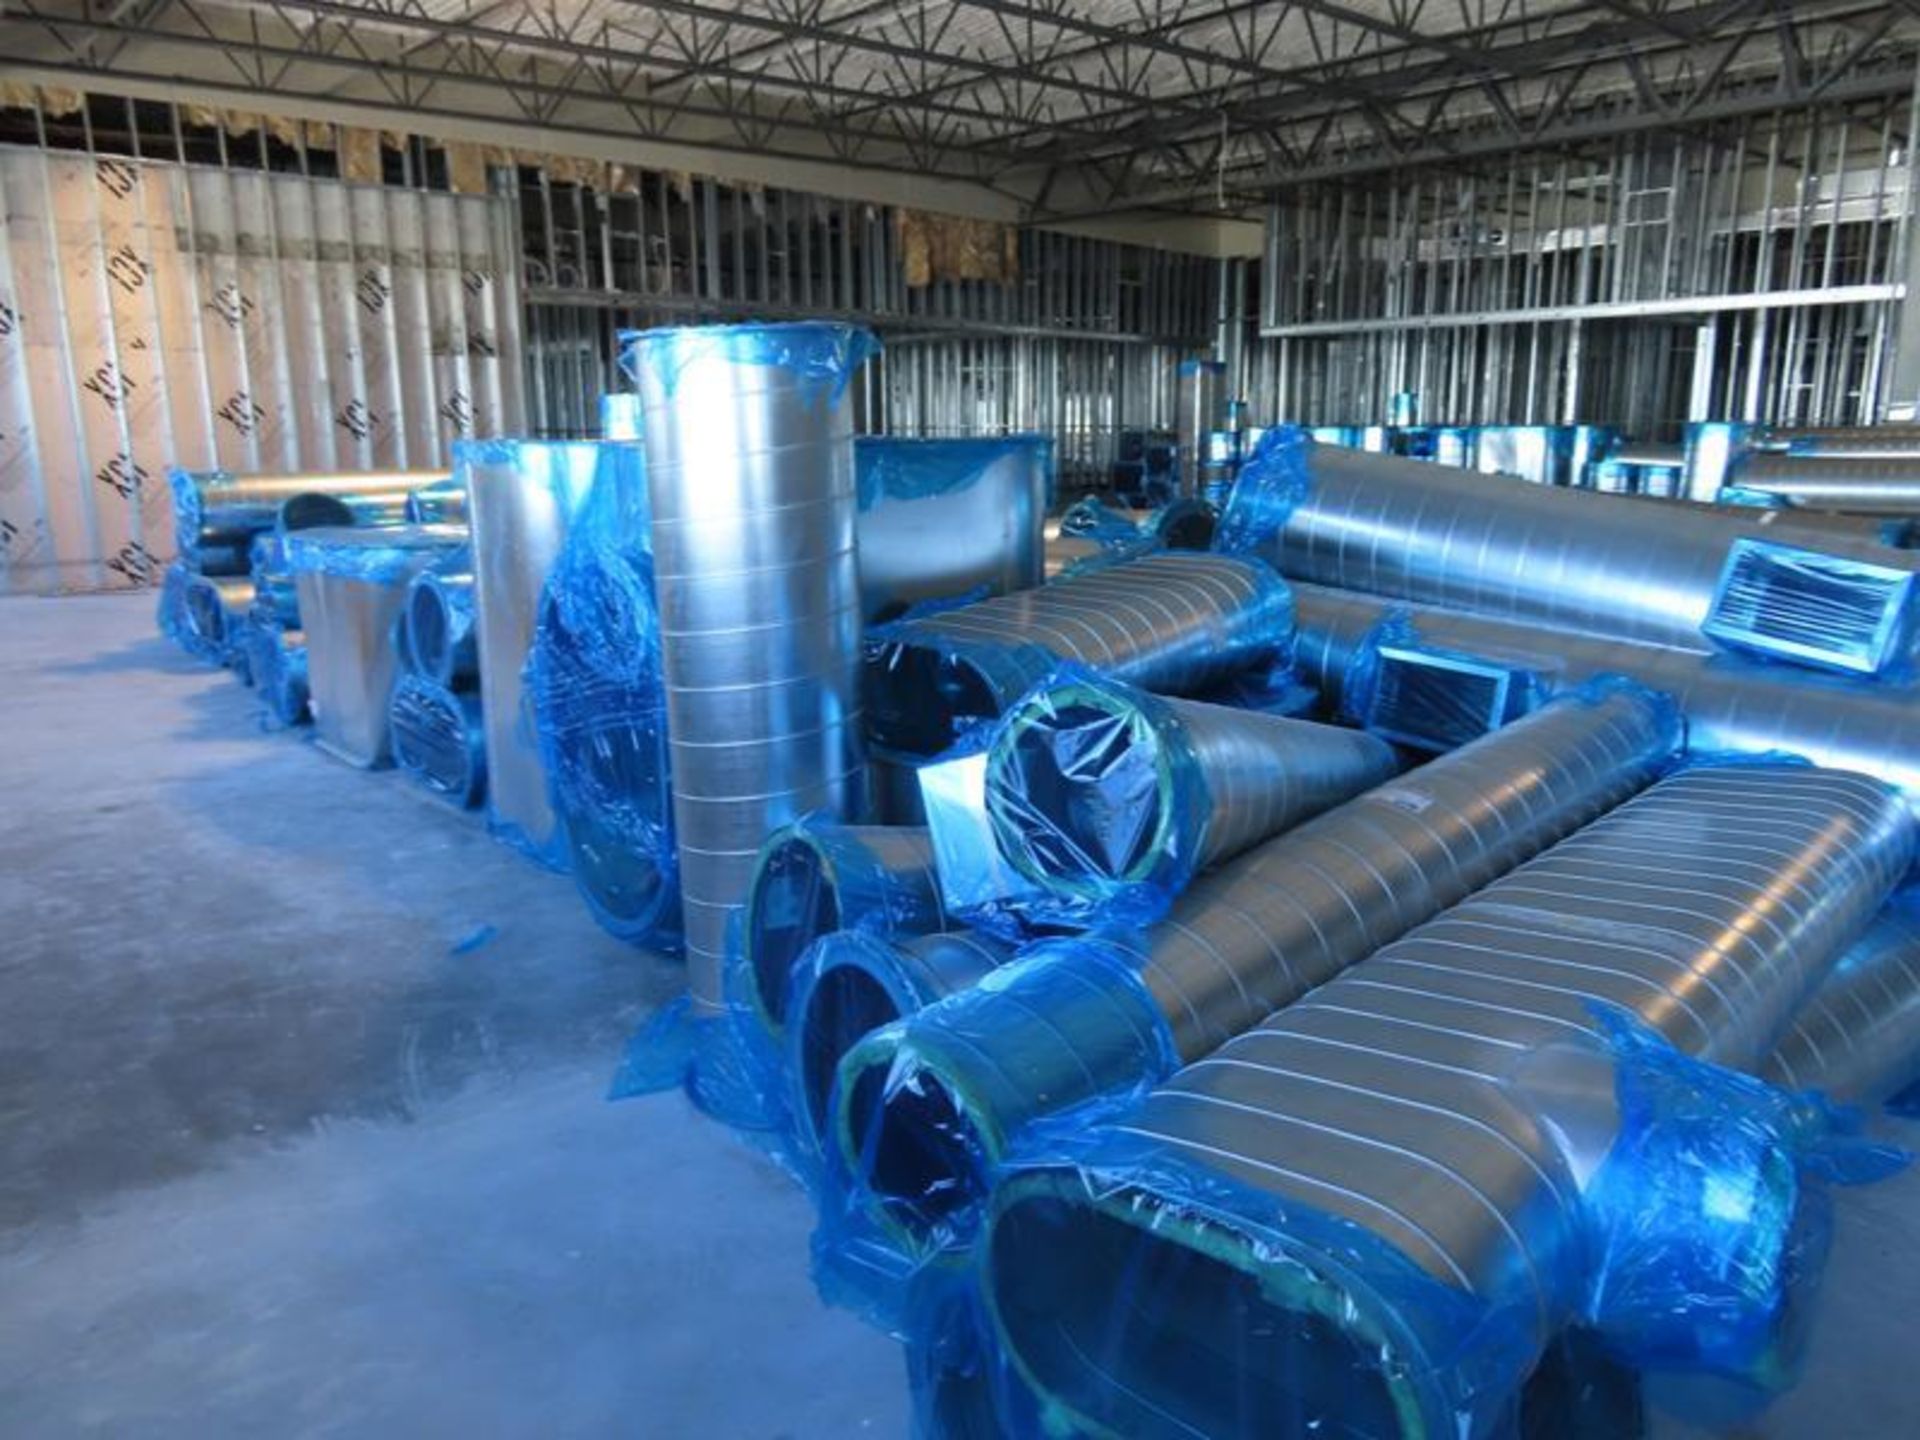 LARGE+C2:C148 SELECTION OF HVAC DUCT, VARIOUS LENGTHS AND VENT CONFIGURATIONS - Image 3 of 5